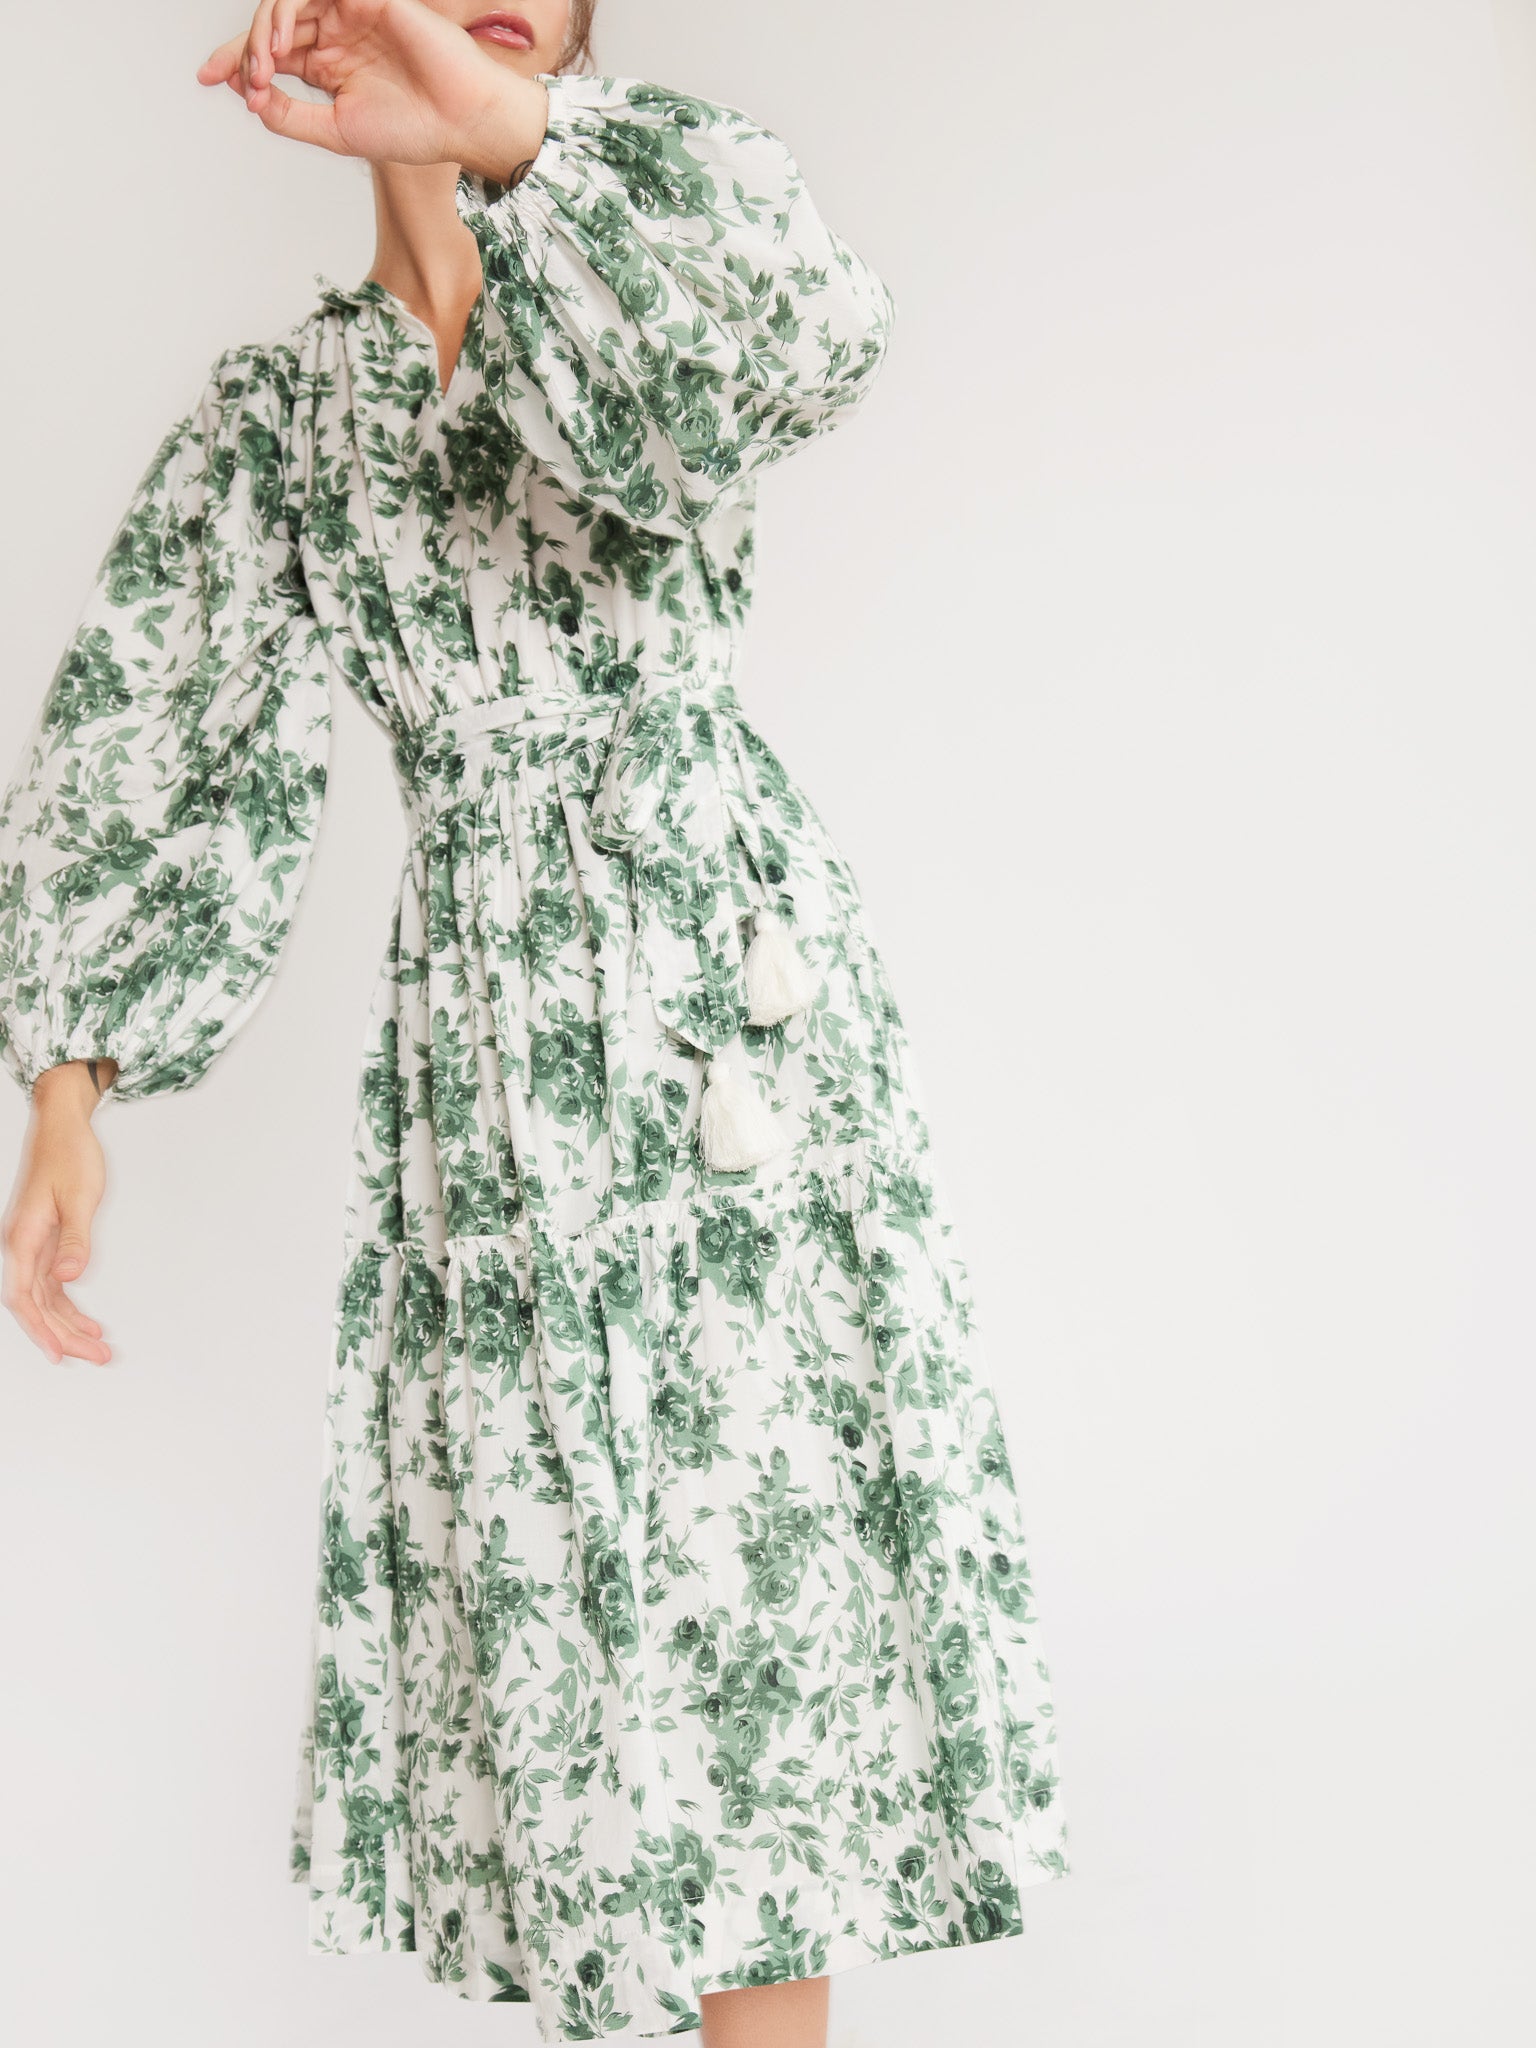 MILLE Clothing Marlo Dress in Green Bouquet